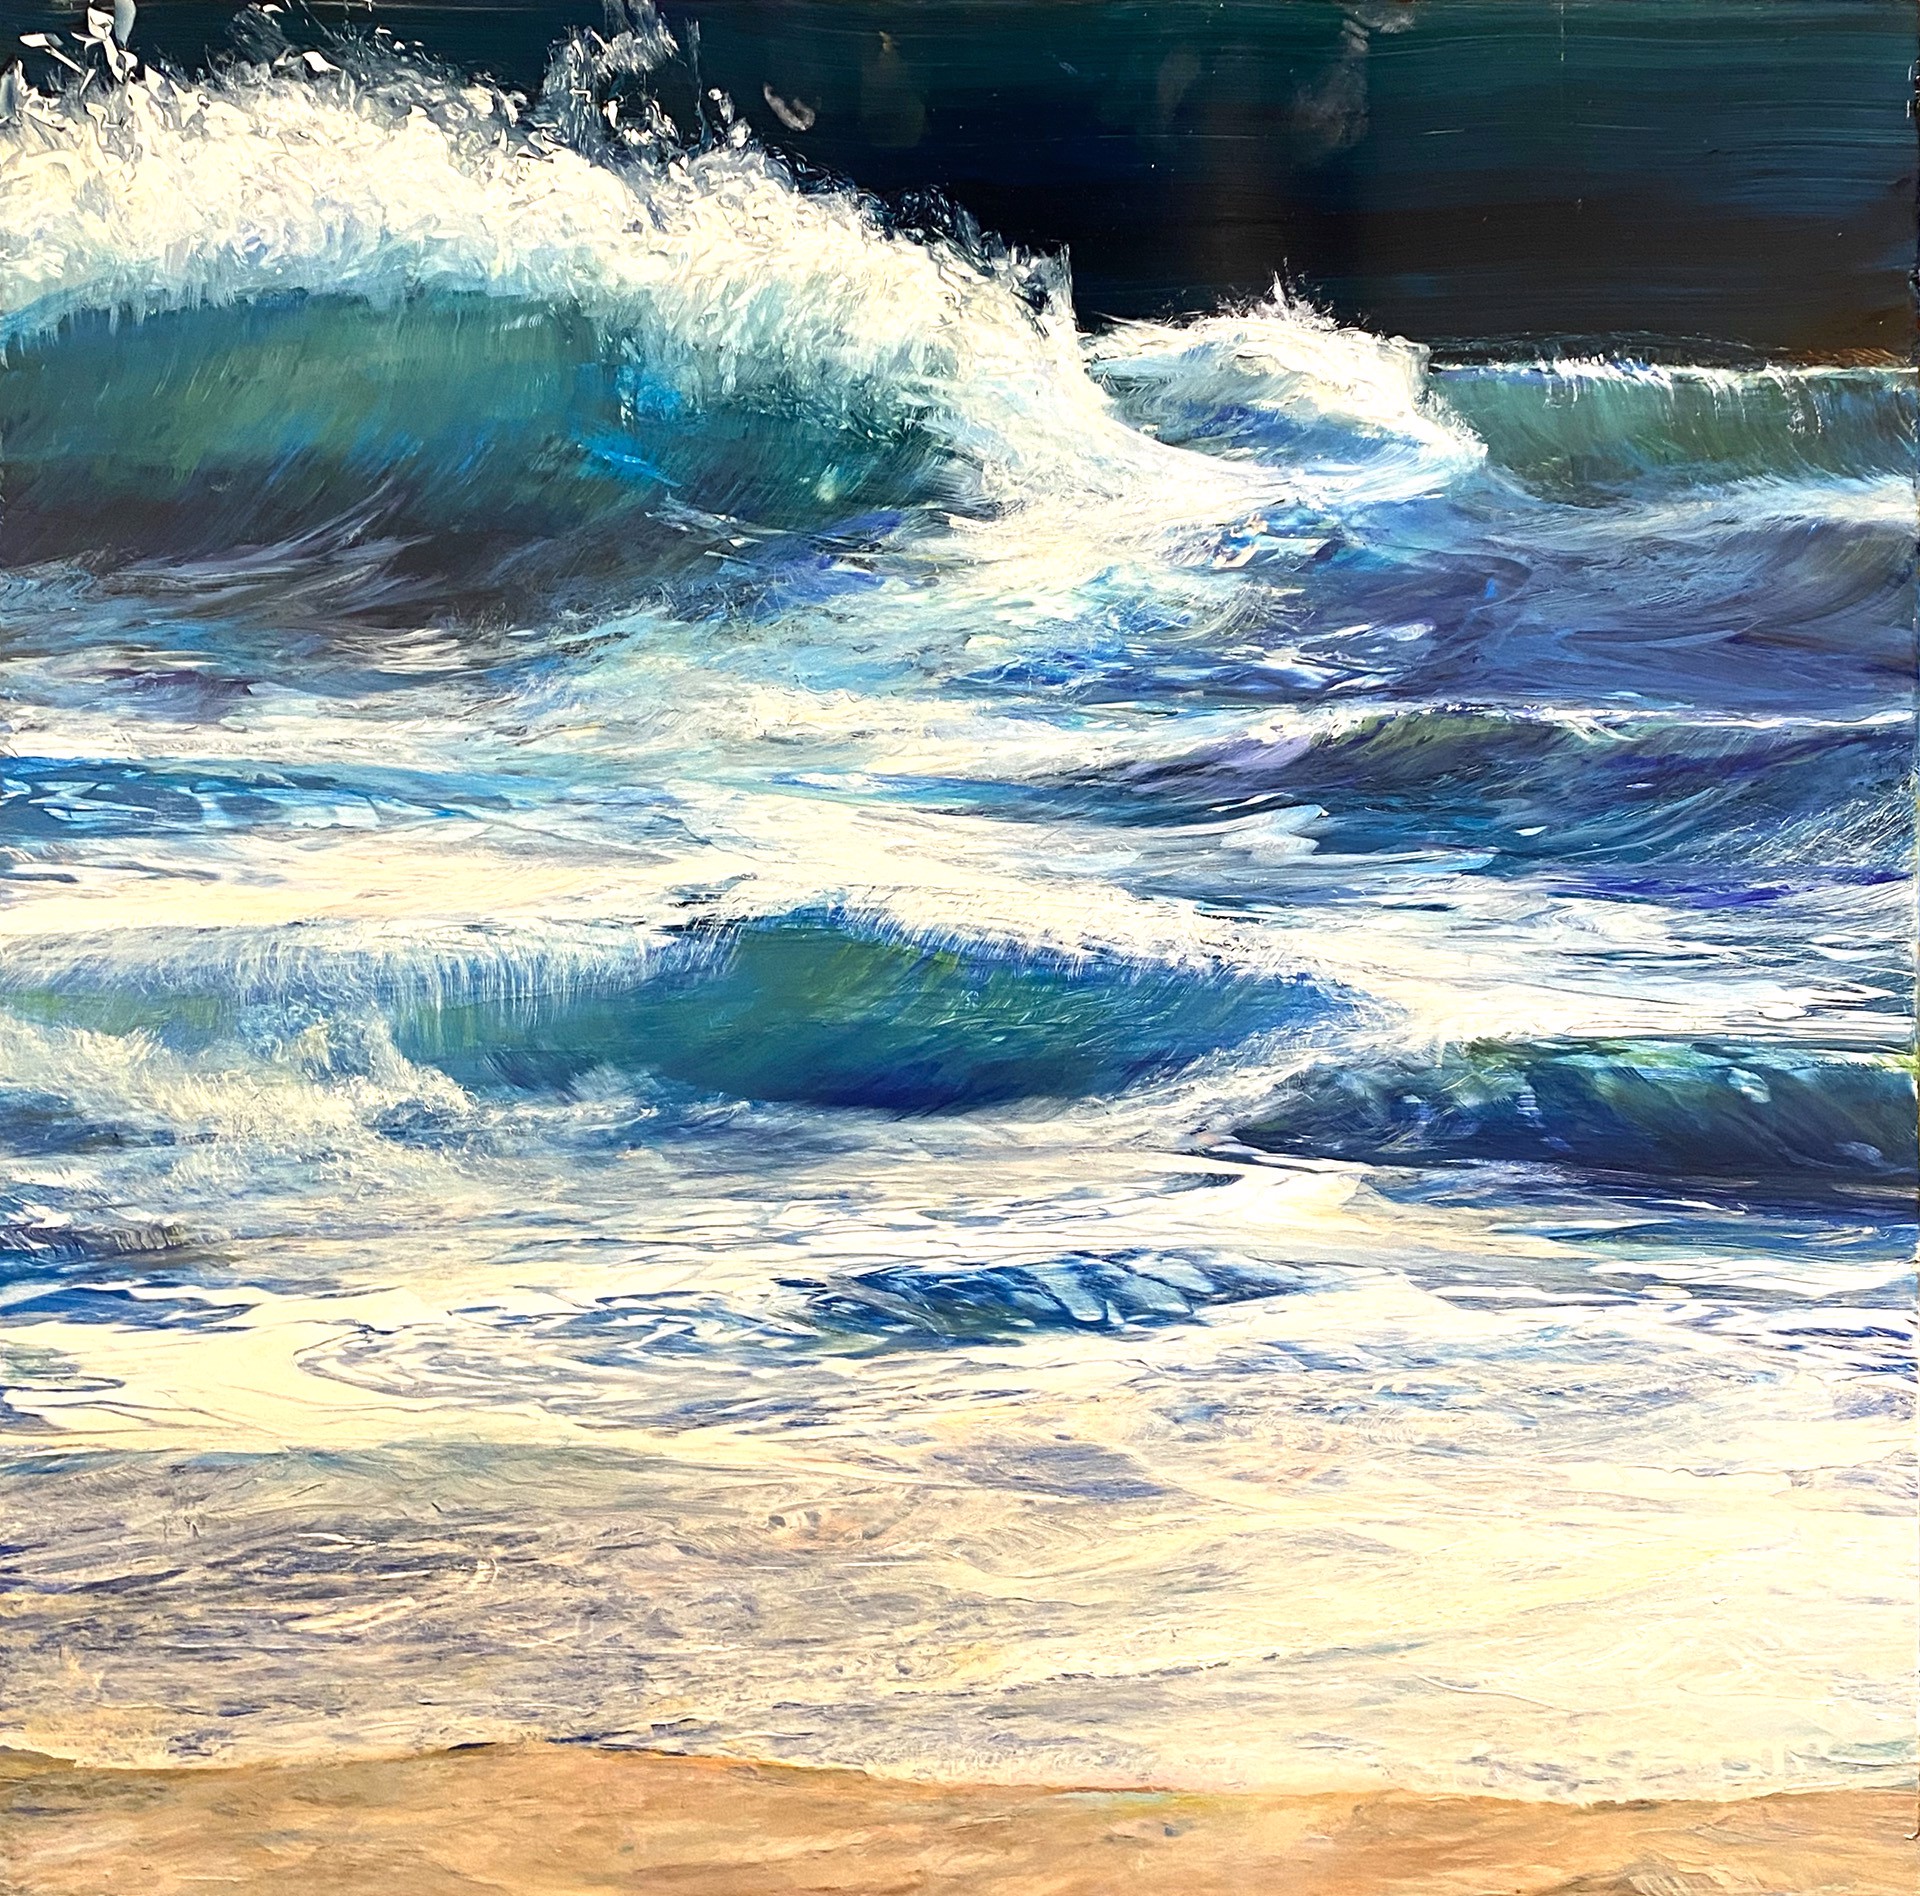 Oil on aluminum seascape by David Dunlop of waves crashing on the beach